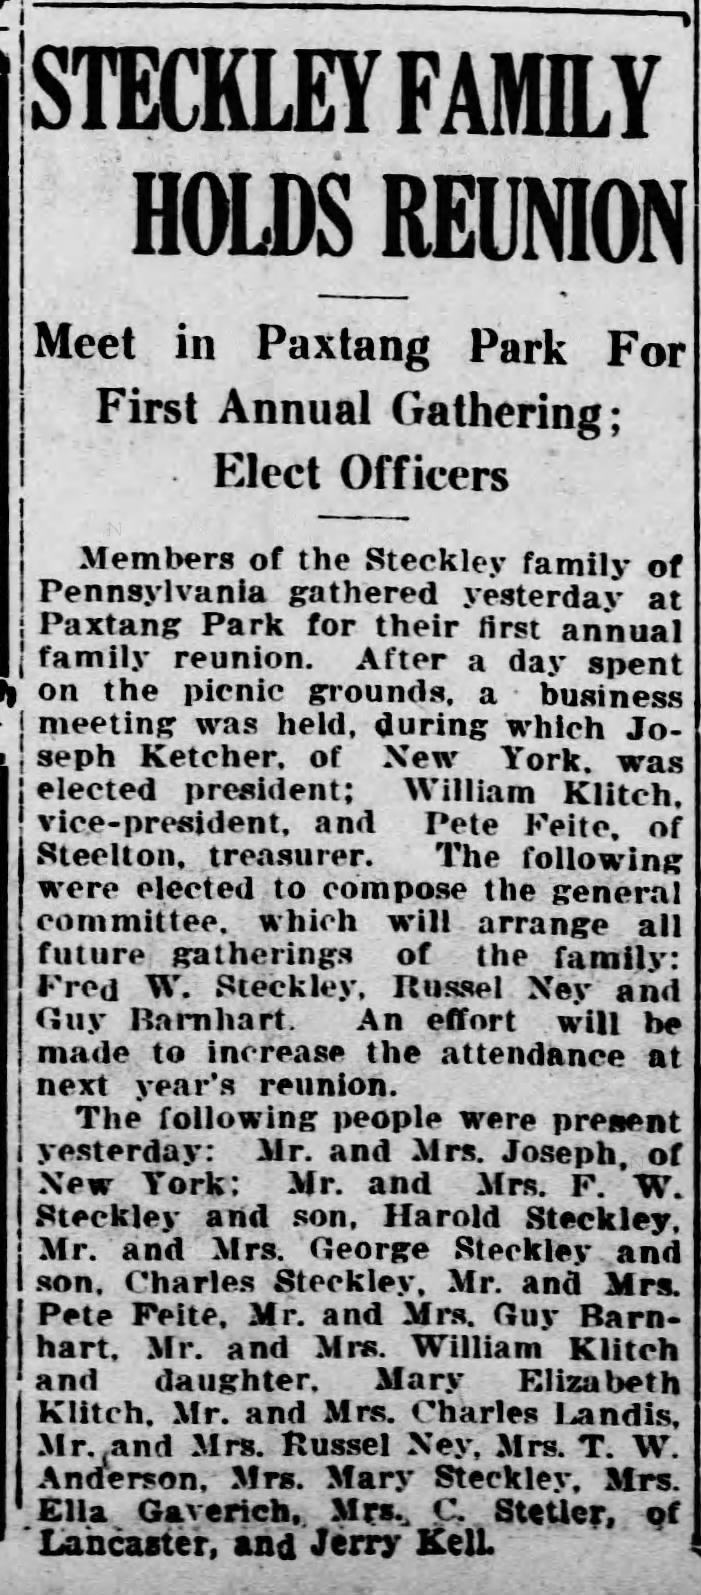 Steckley Family First Annual Reunion.  Election of Officers. 1921